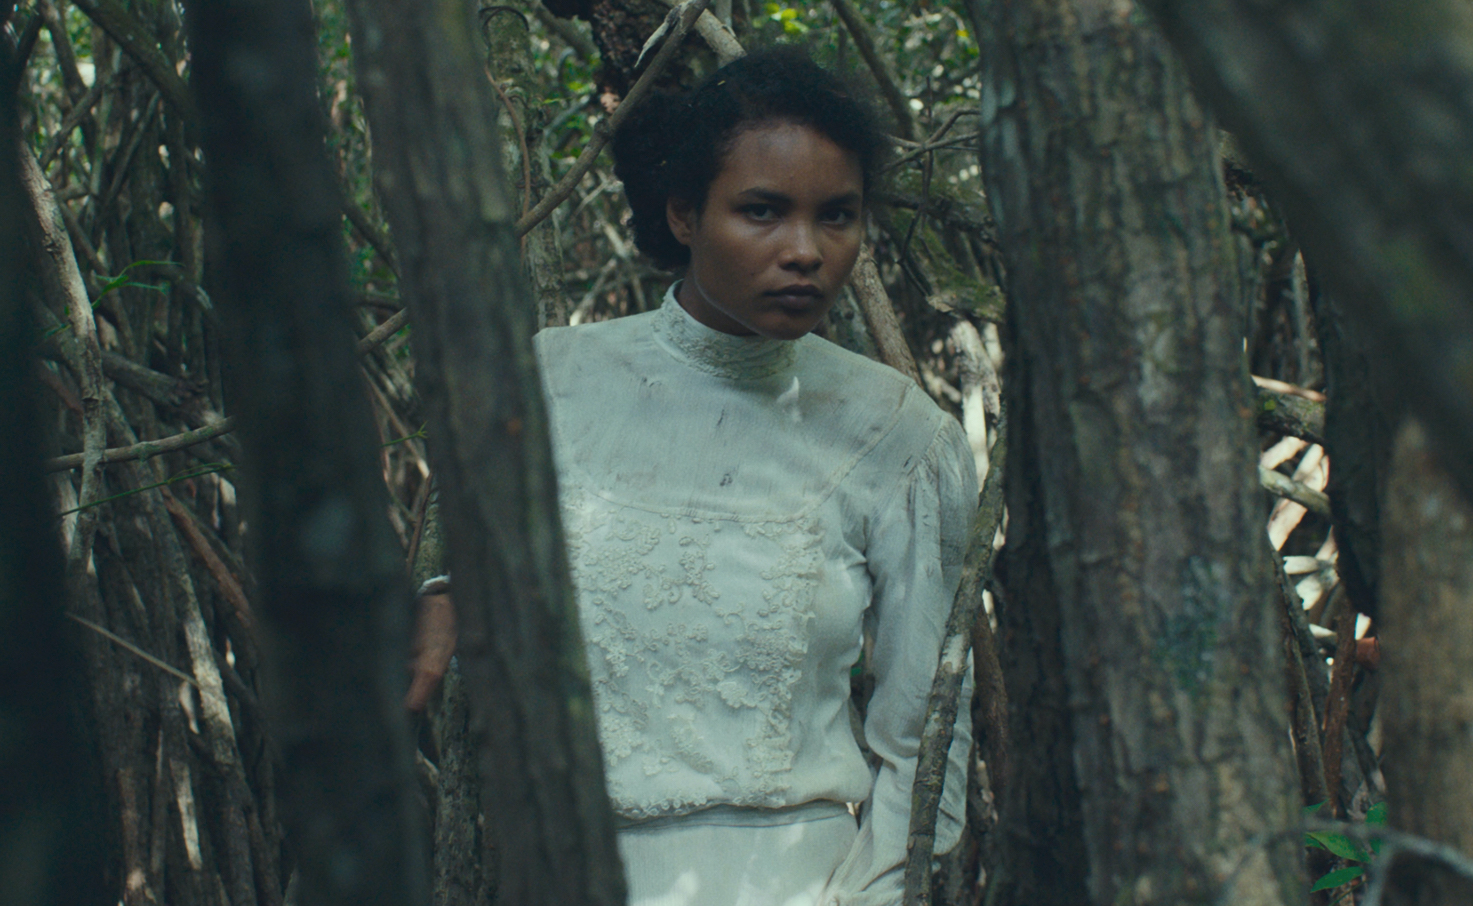 A woman in white, played by Indira Rubie Andrewin, peers between trees in Tragic Jungle